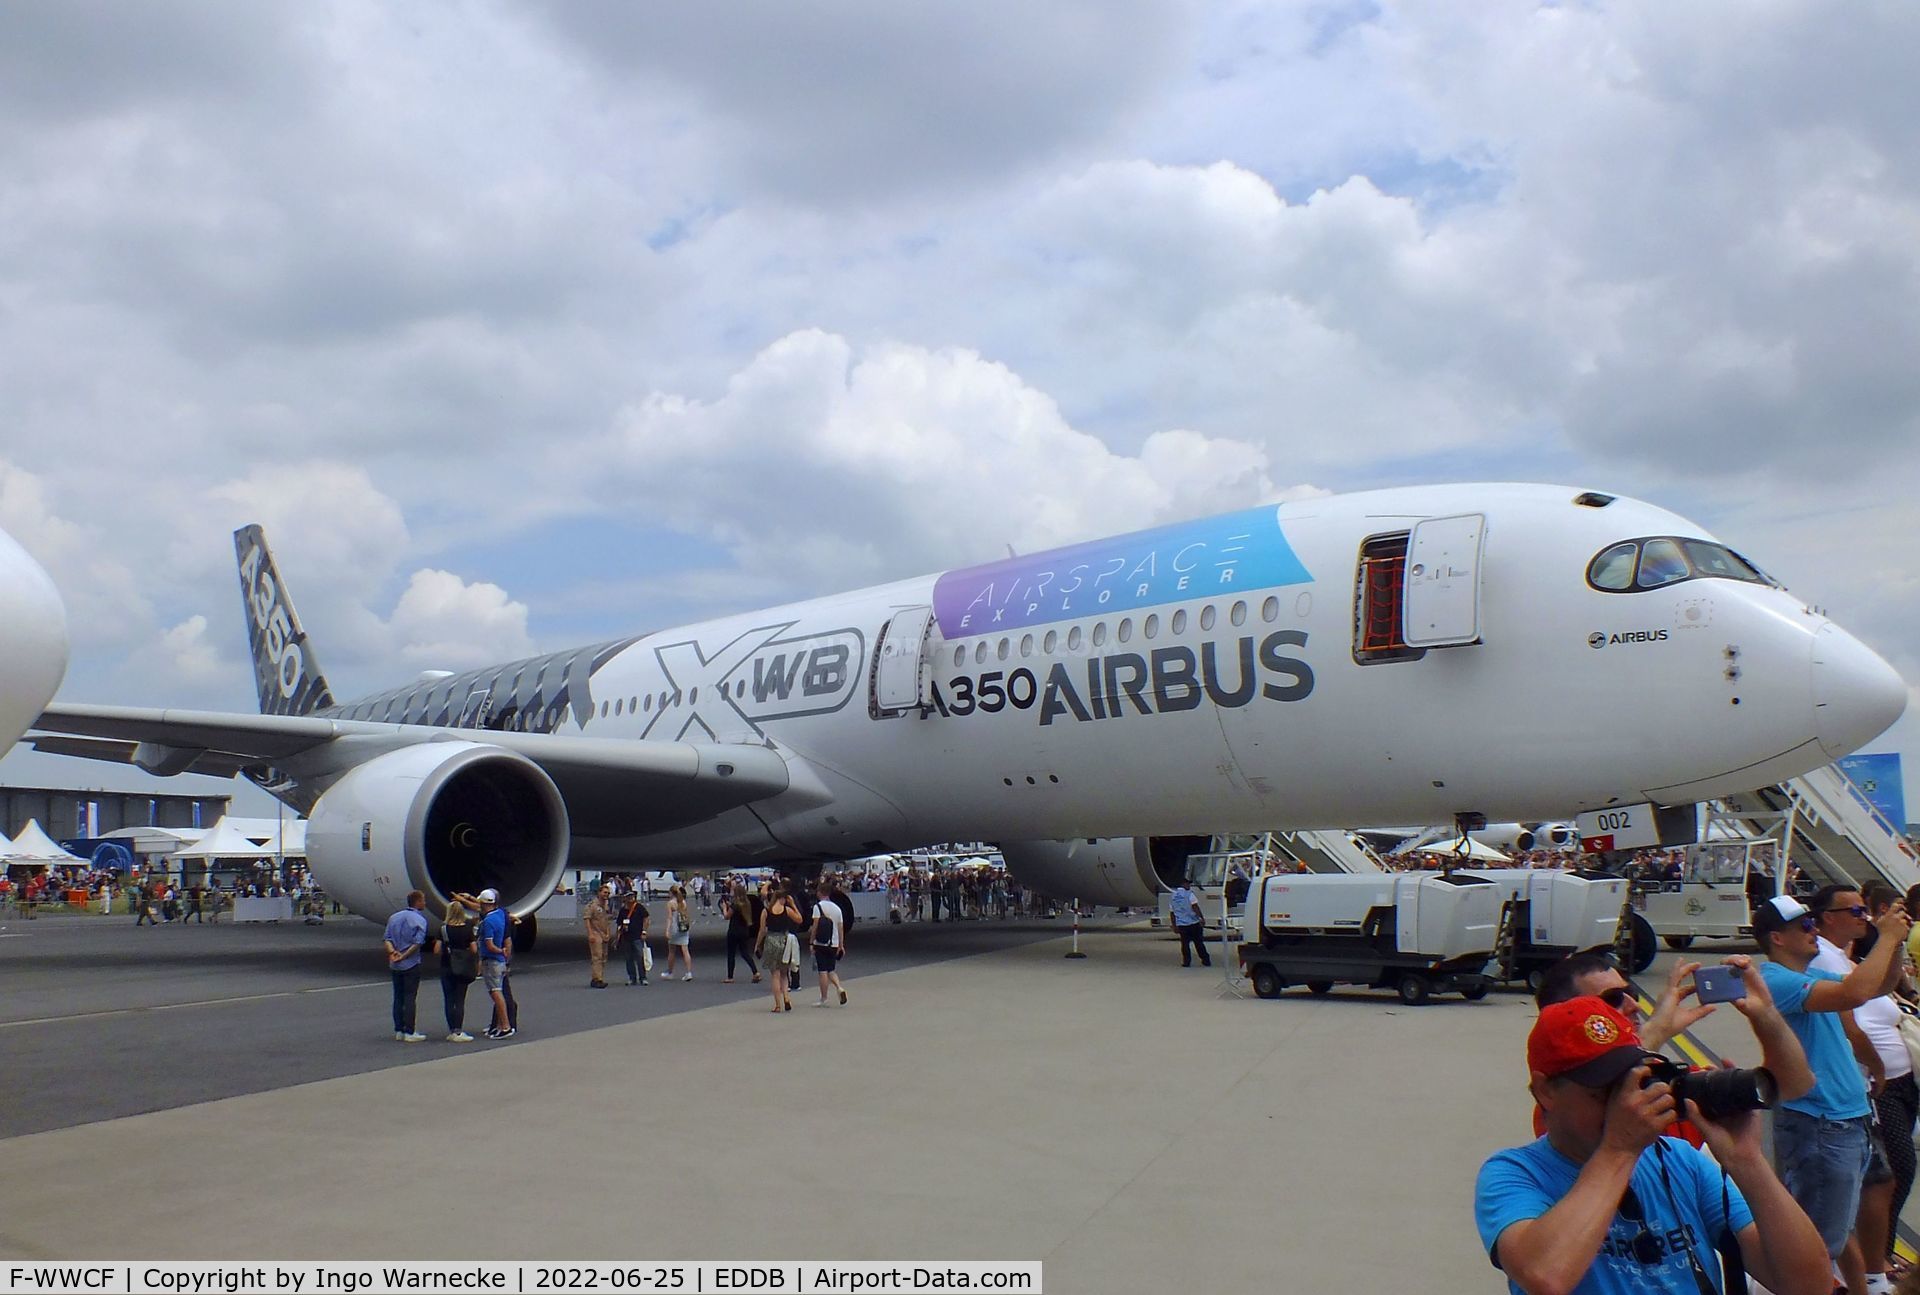 F-WWCF, 2013 Airbus A350-941 C/N 002, Airbus A350-941 Airspace Explorer (cabin technology demonstrator) at ILA 2022, Berlin